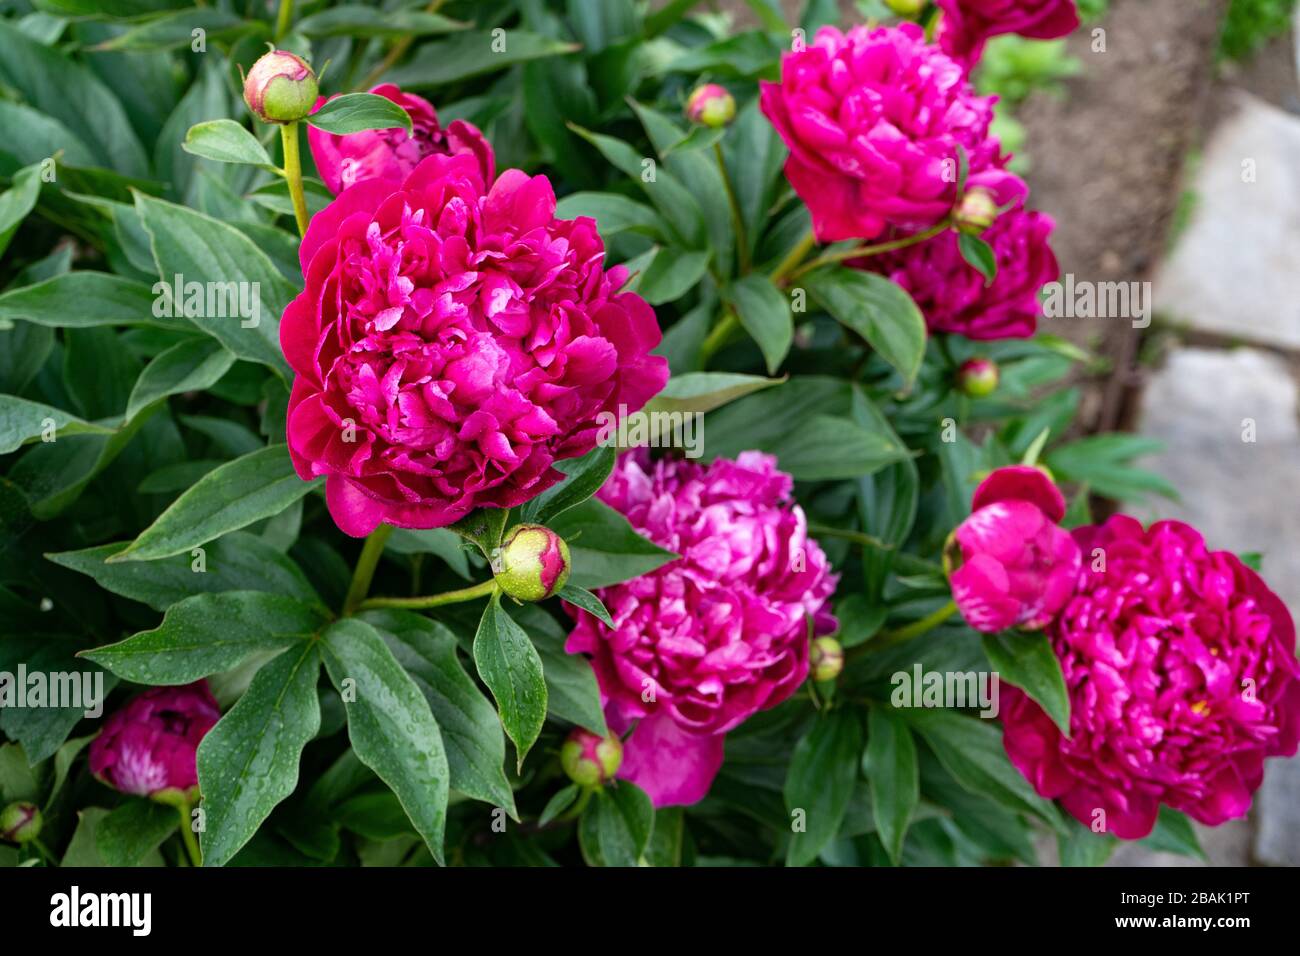 Red peony flower on a background of green leaves in the garden Stock Photo